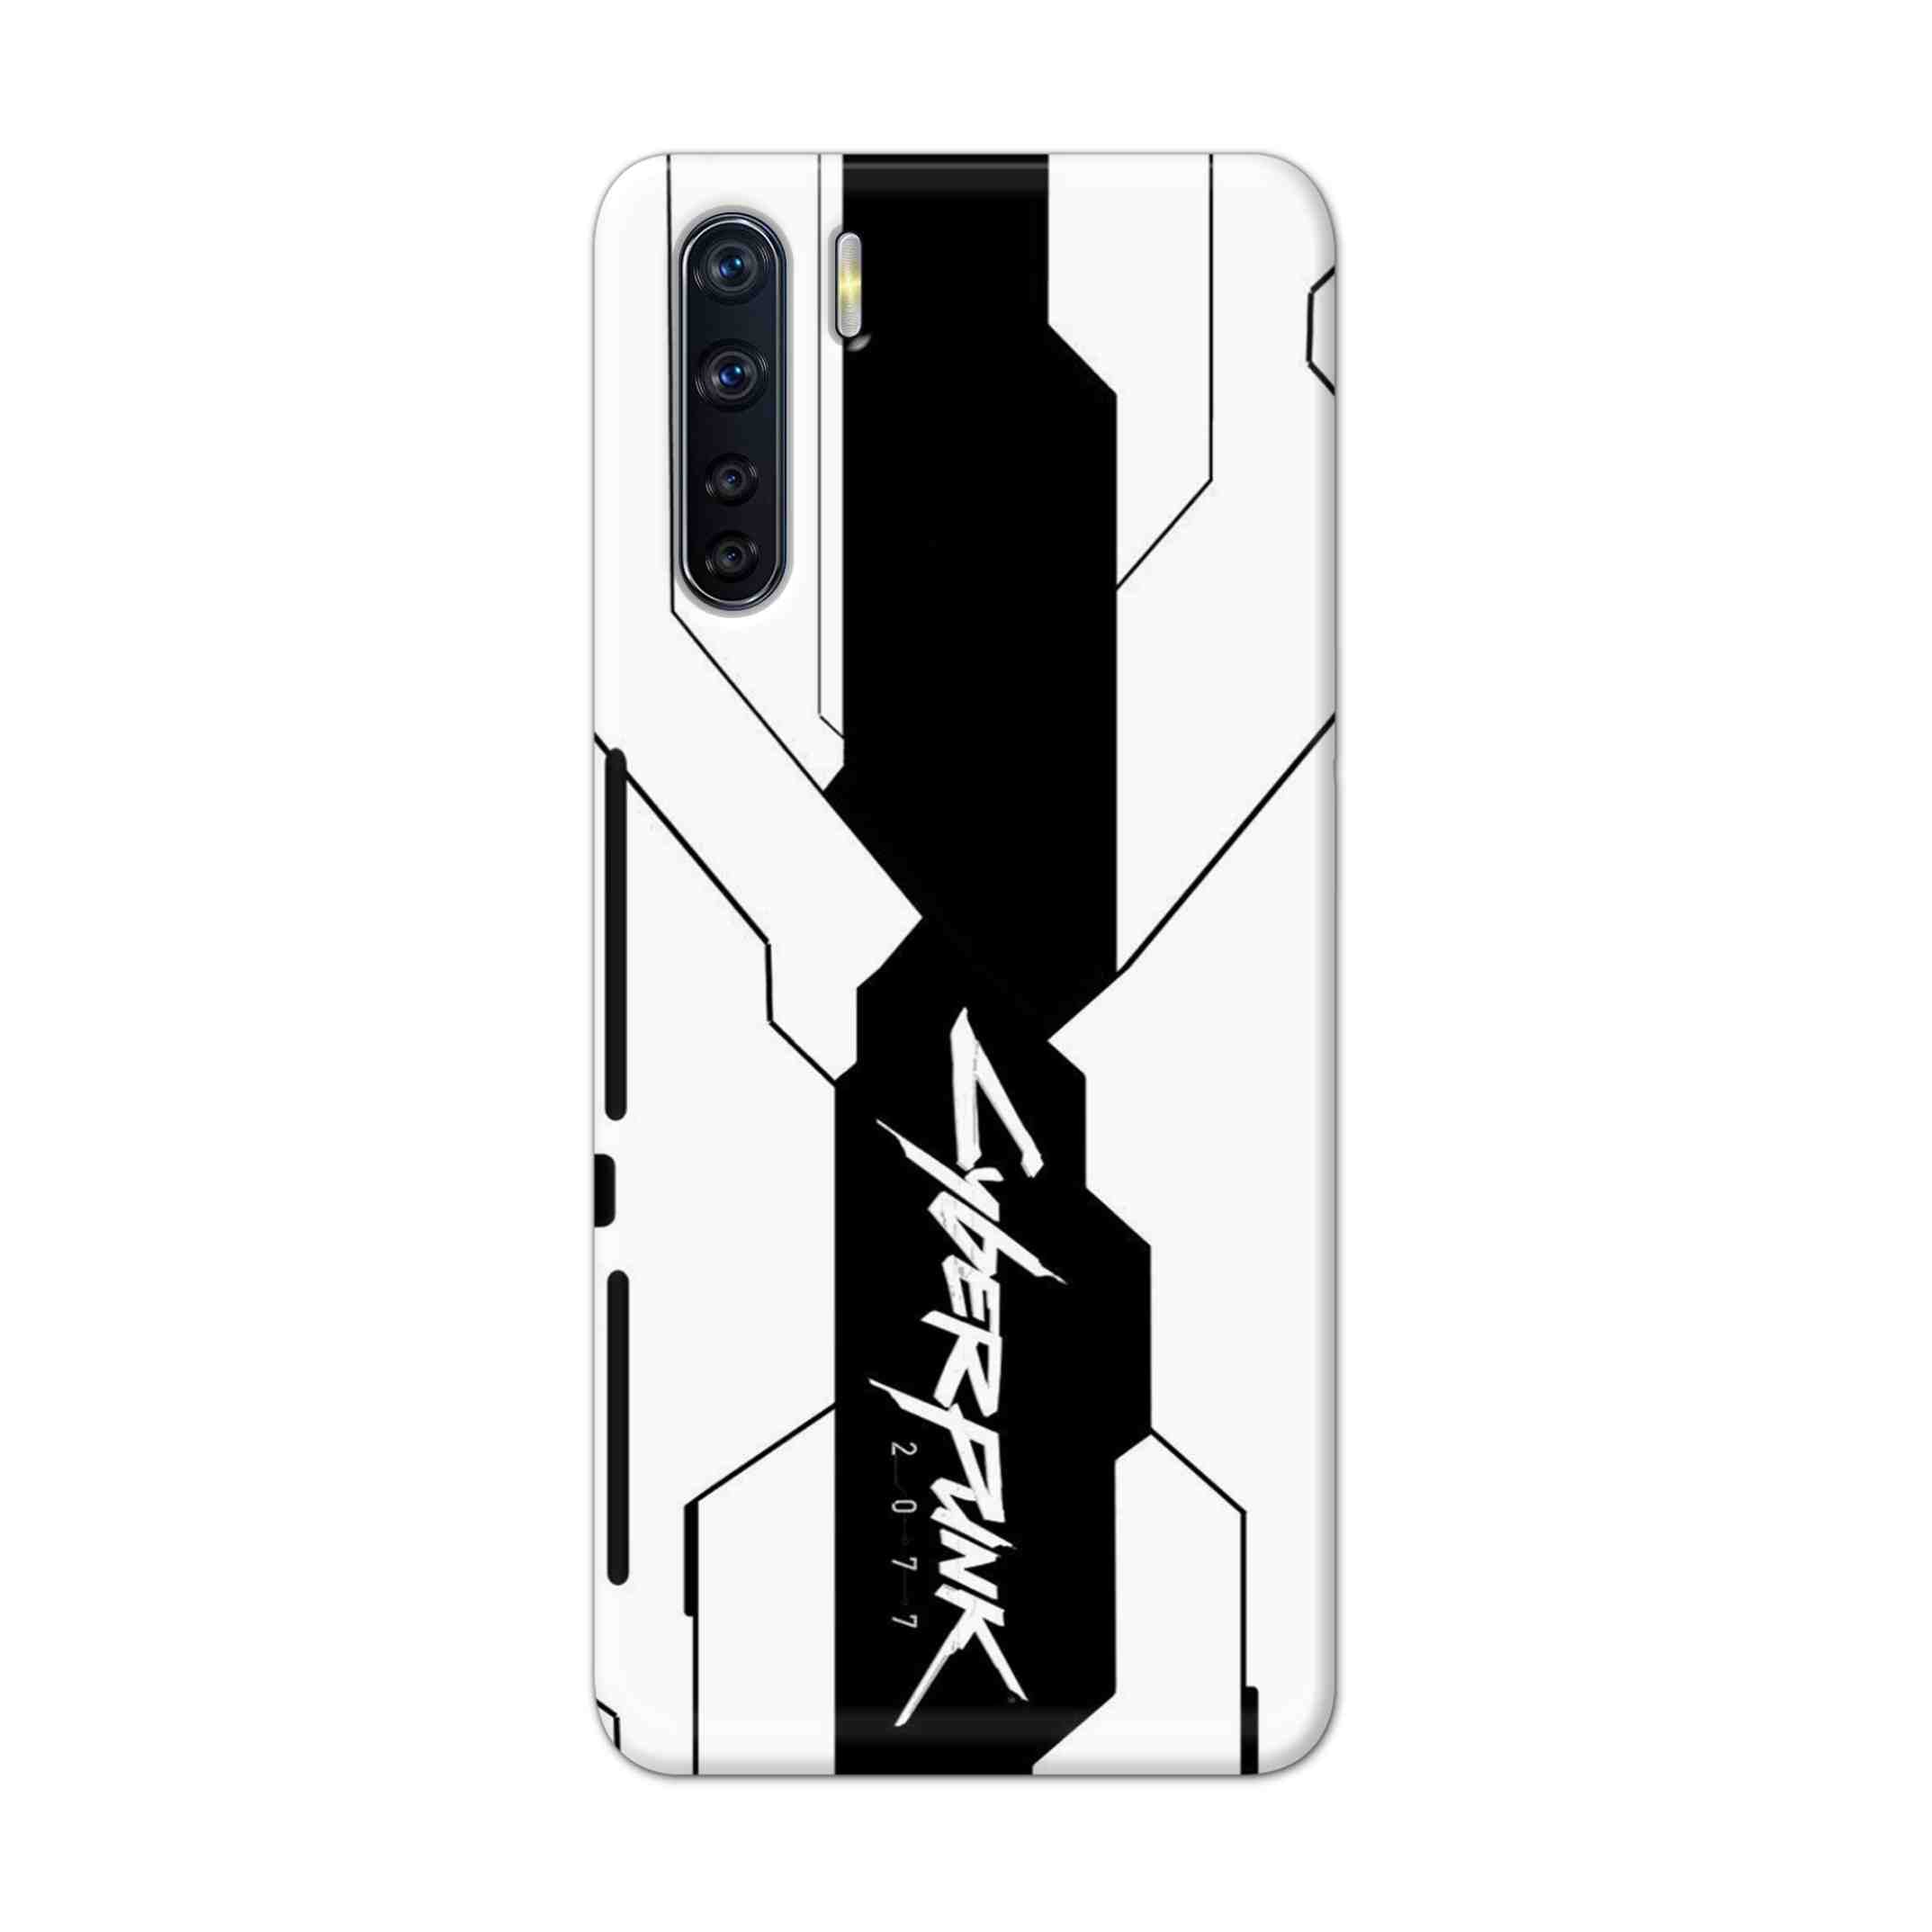 Buy Cyberpunk 2077 Hard Back Mobile Phone Case Cover For OPPO F15 Online